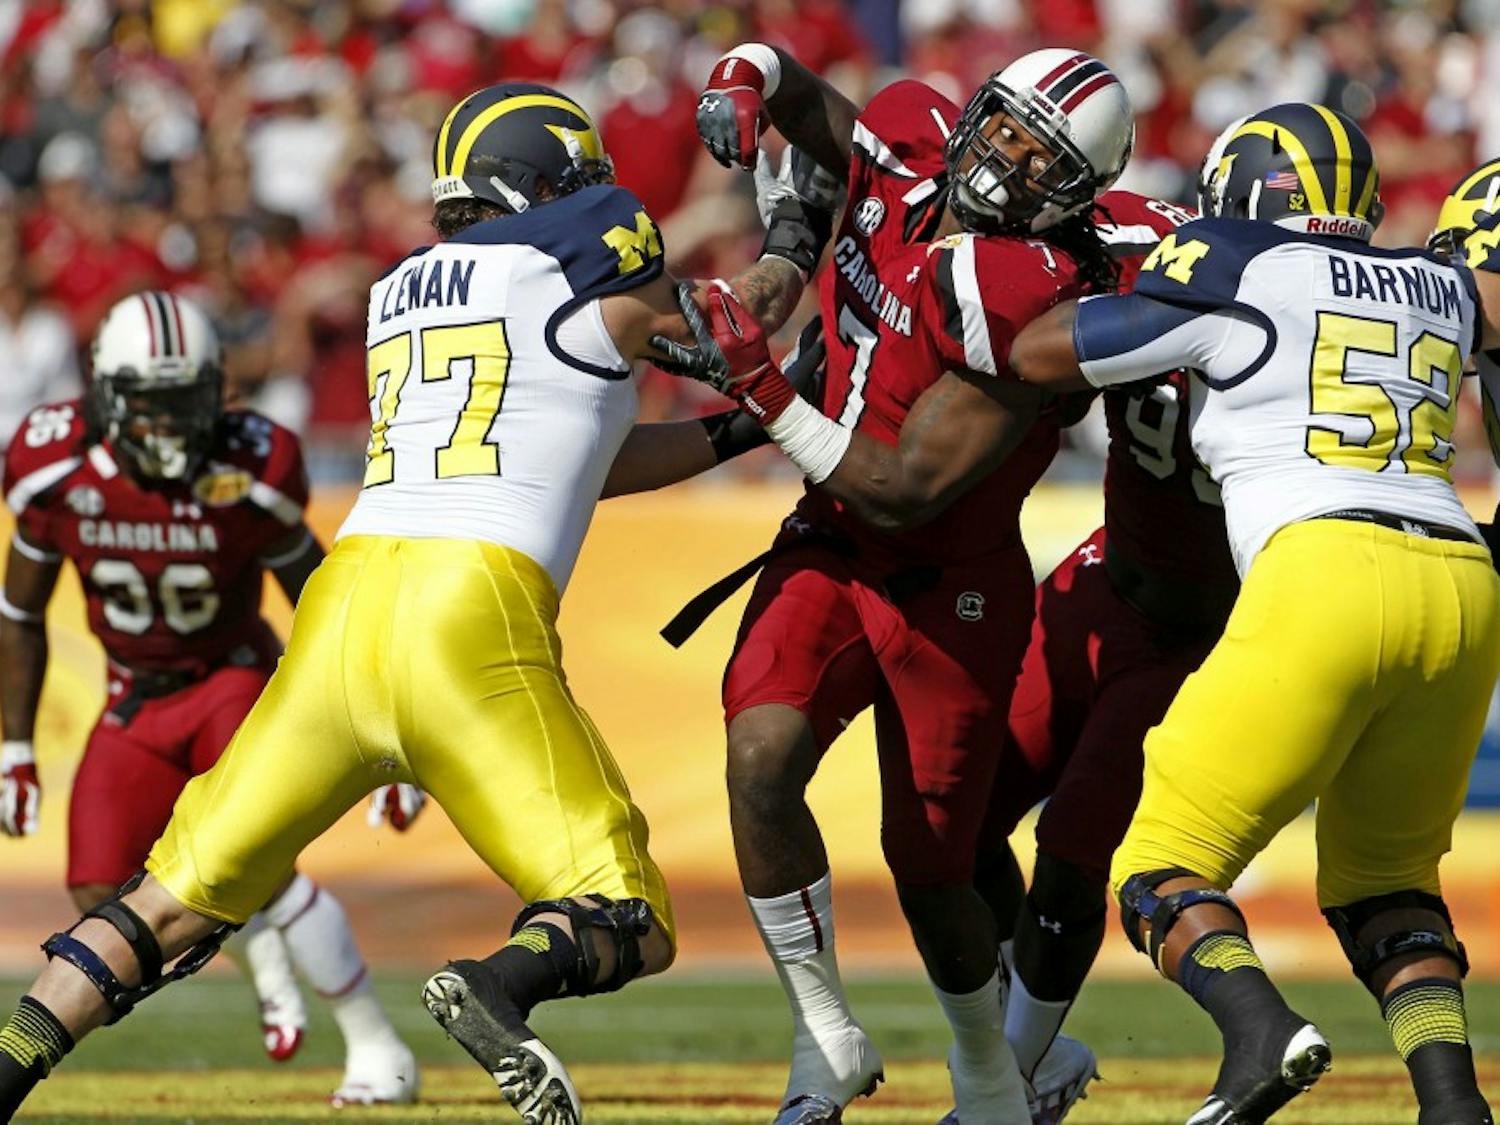 South Carolina defensive end Jadeveon Clowney (7) is double-teamed as he rushes the Michigan quarterback in the Outback Bowl at Raymond James Stadium in Tampa, Florida, on Tuesday, January 1, 2013. (Gerry Melendez/The State/MCT)